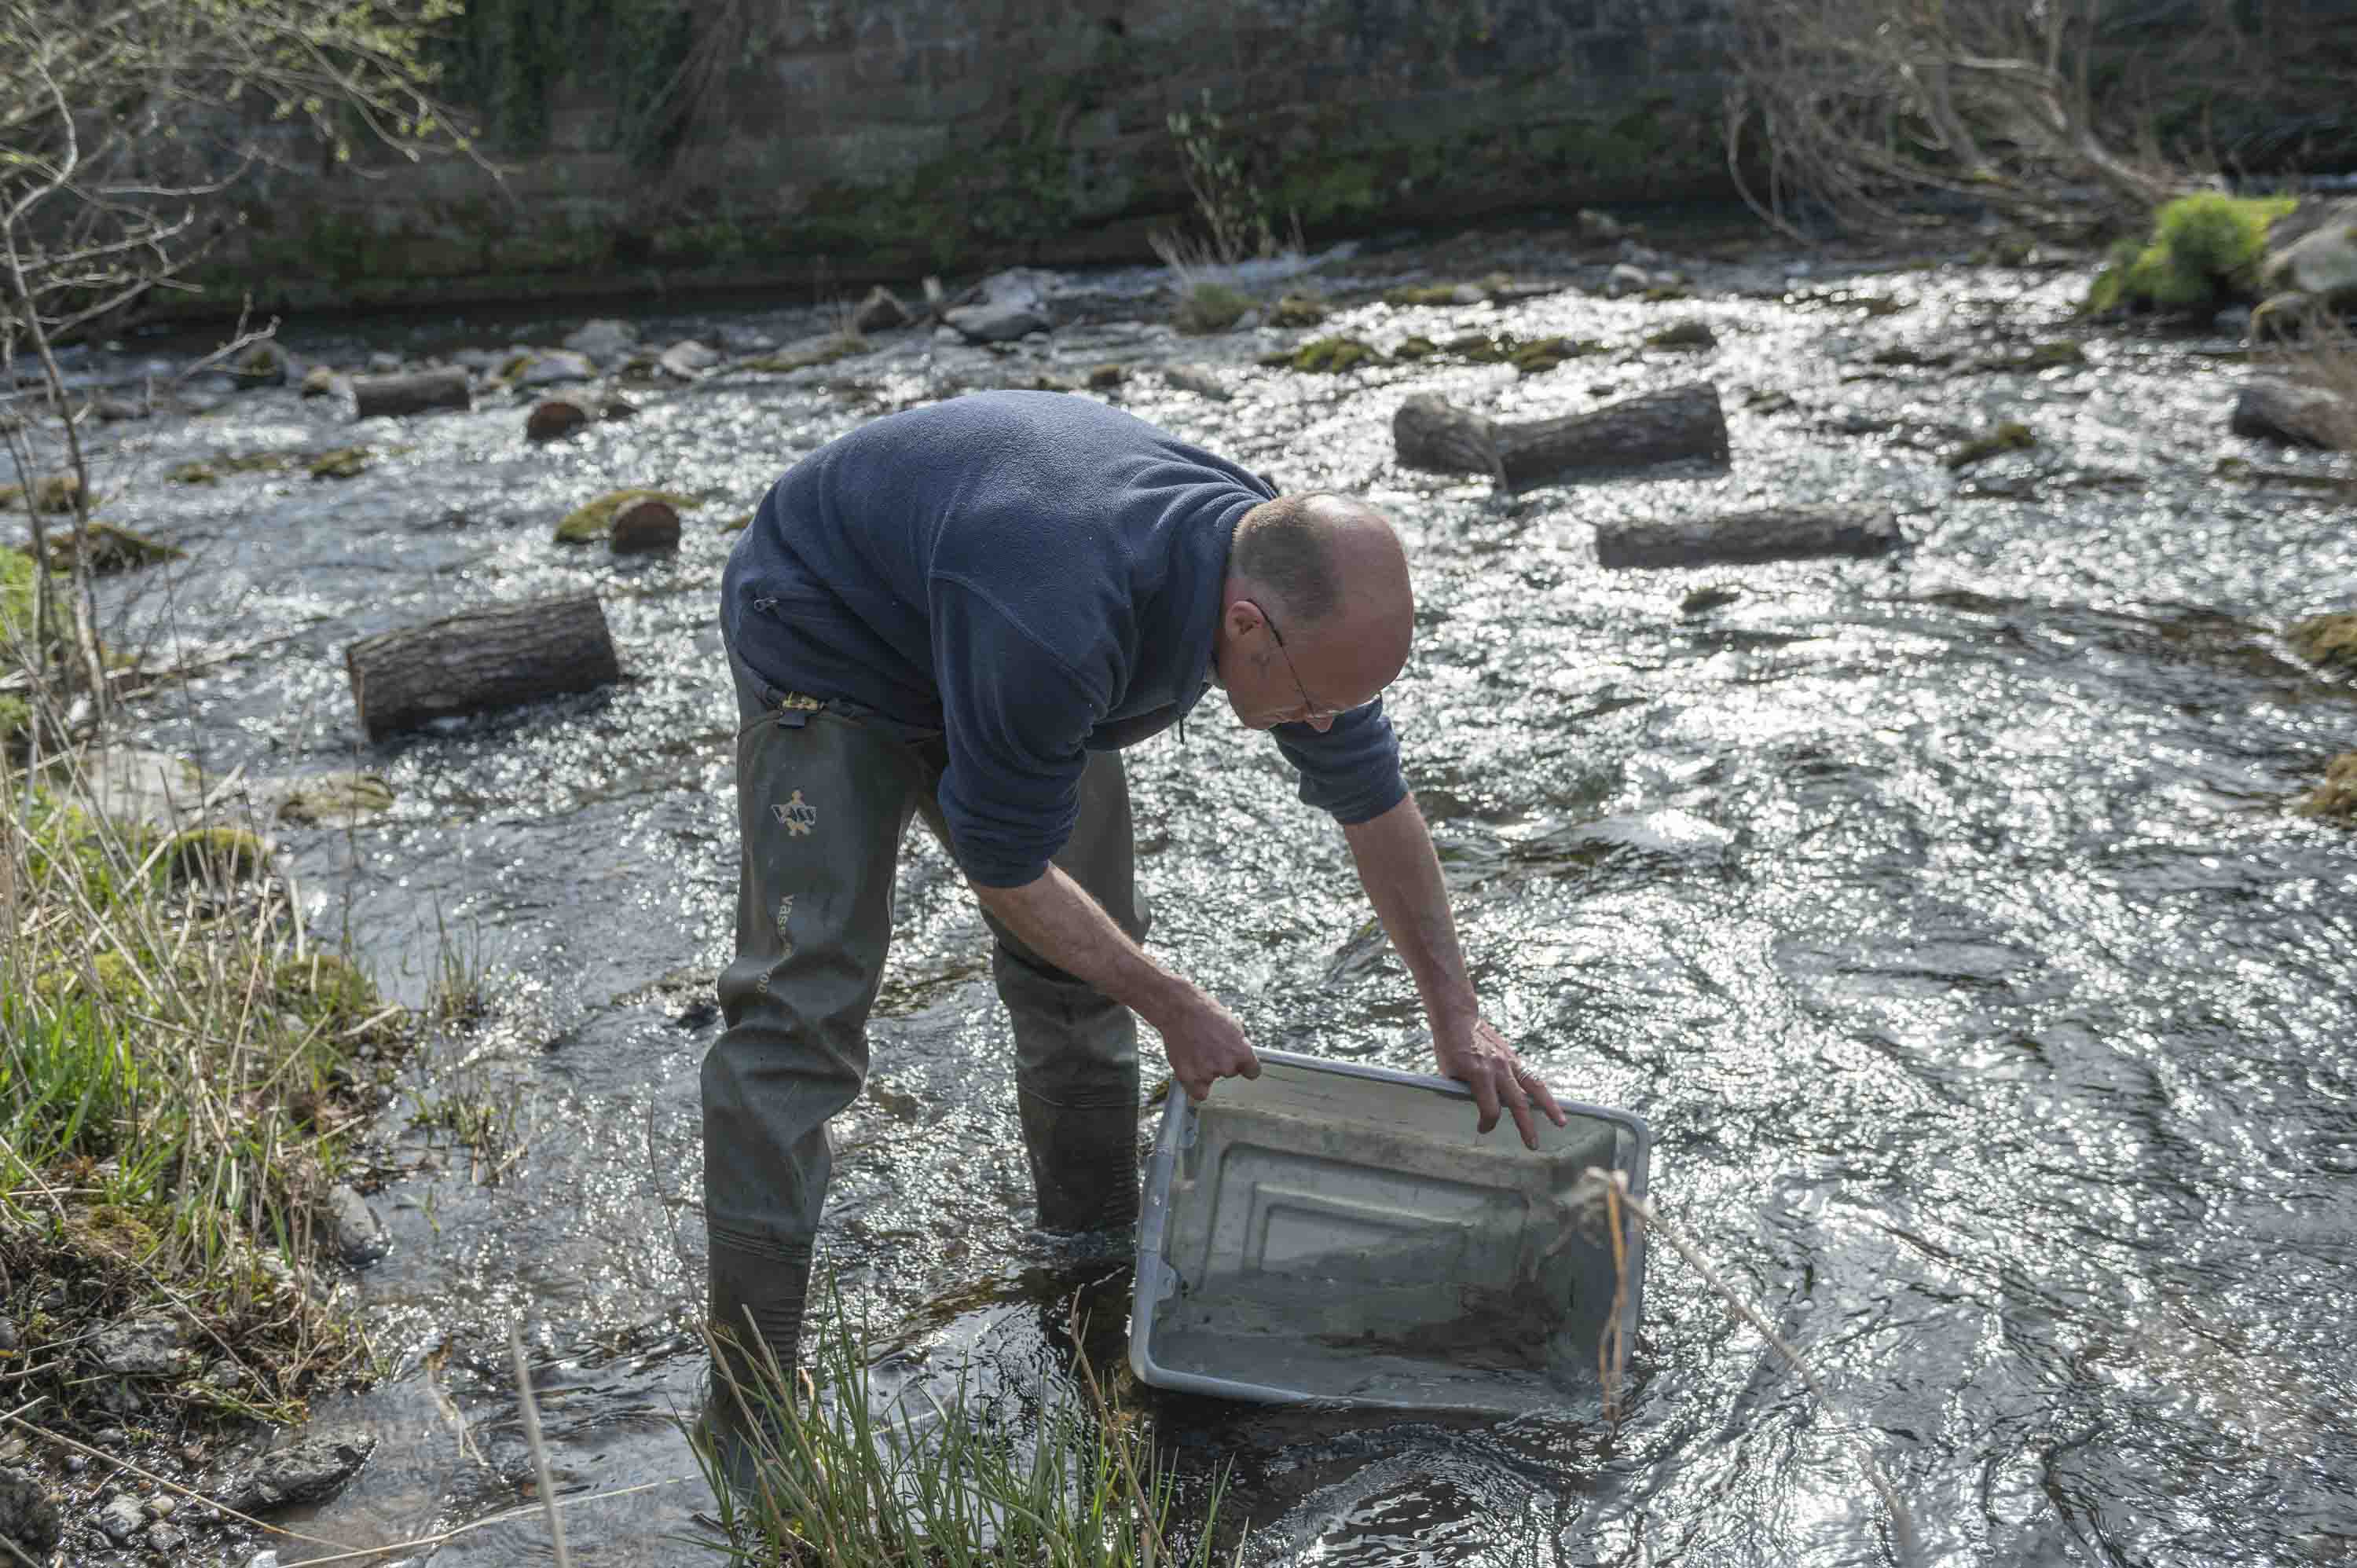 Releasing Smolts